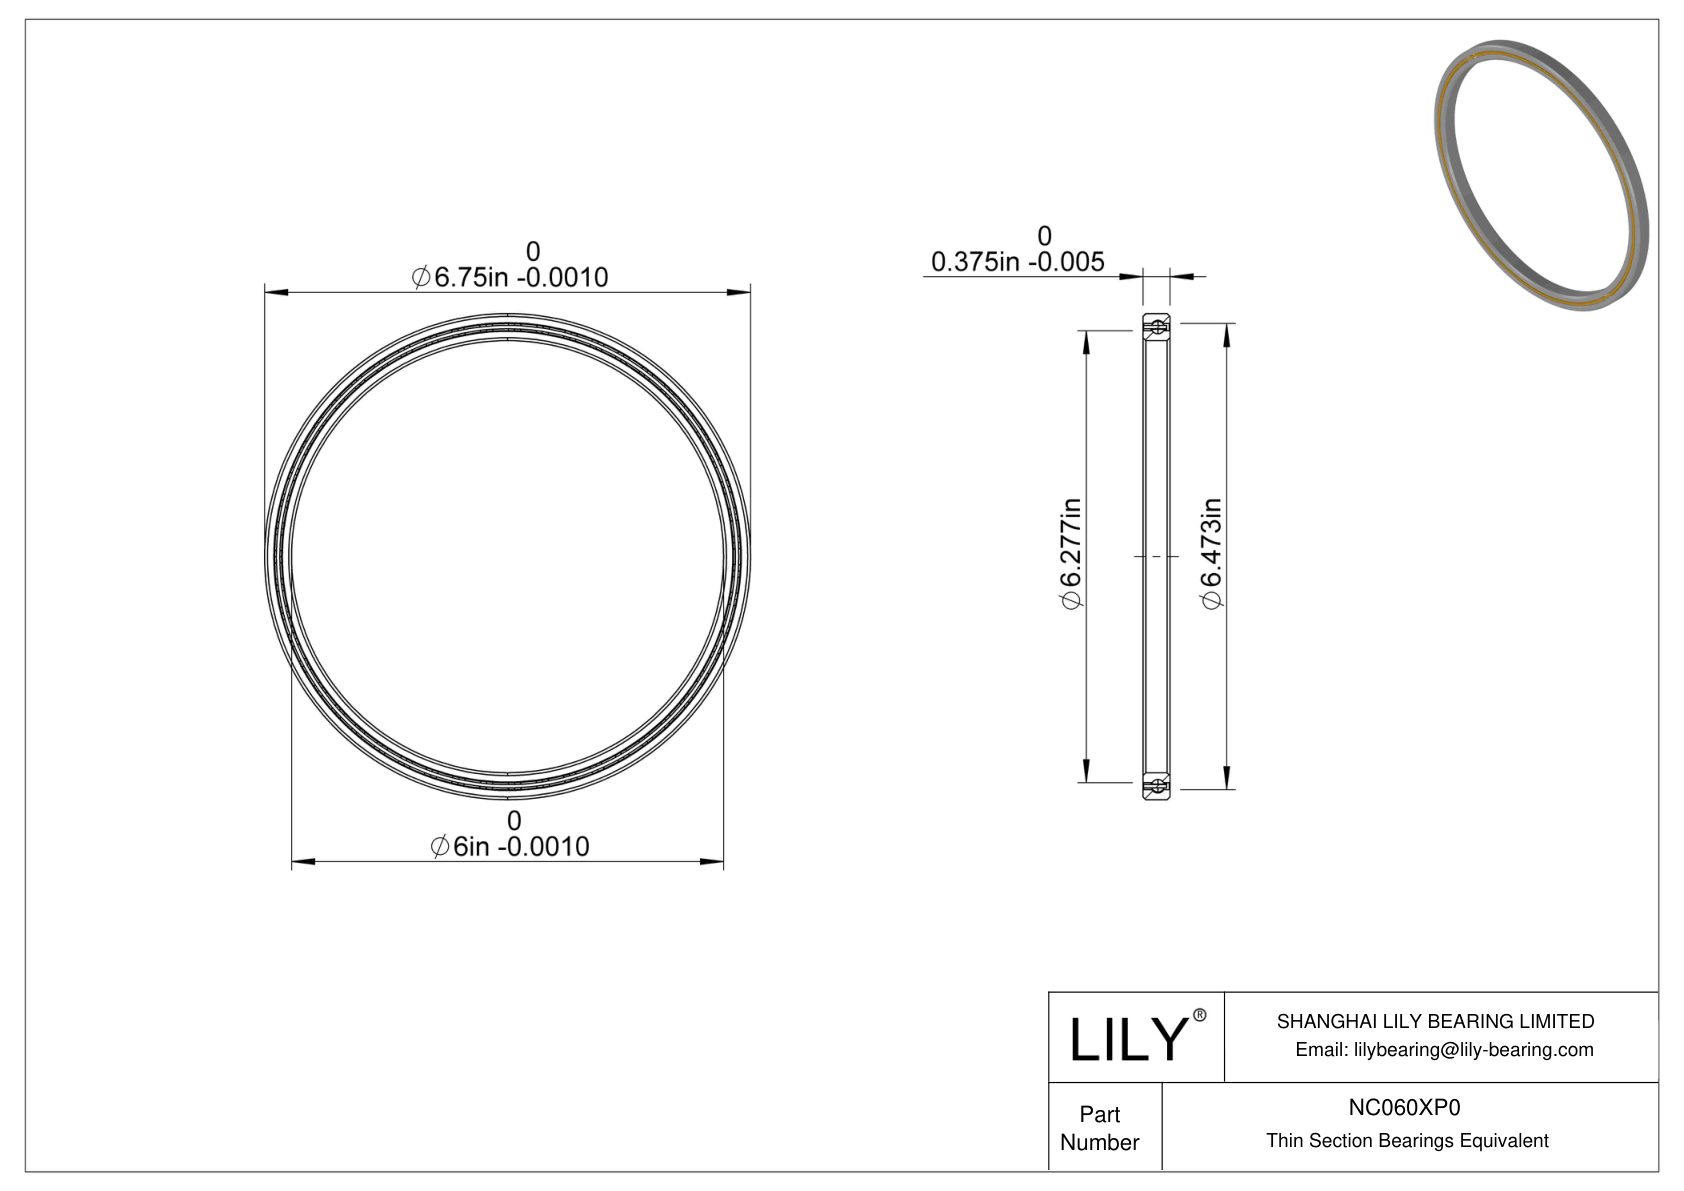 NC060XP0 Constant Section (CS) Bearings cad drawing